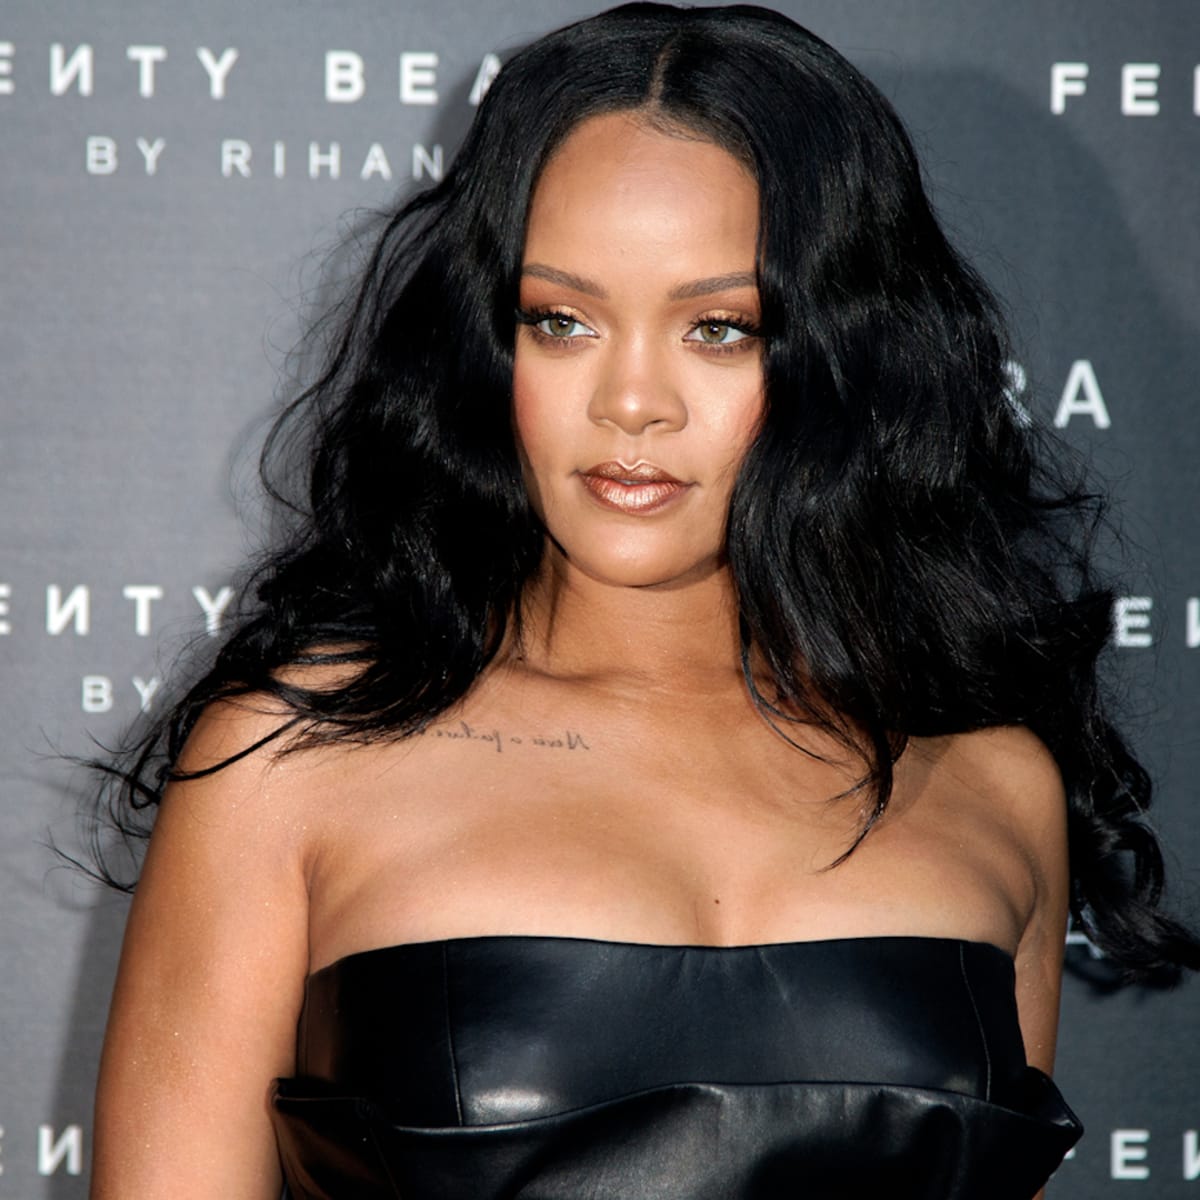 How Much Of Fenty Beauty Does Rihanna Own?